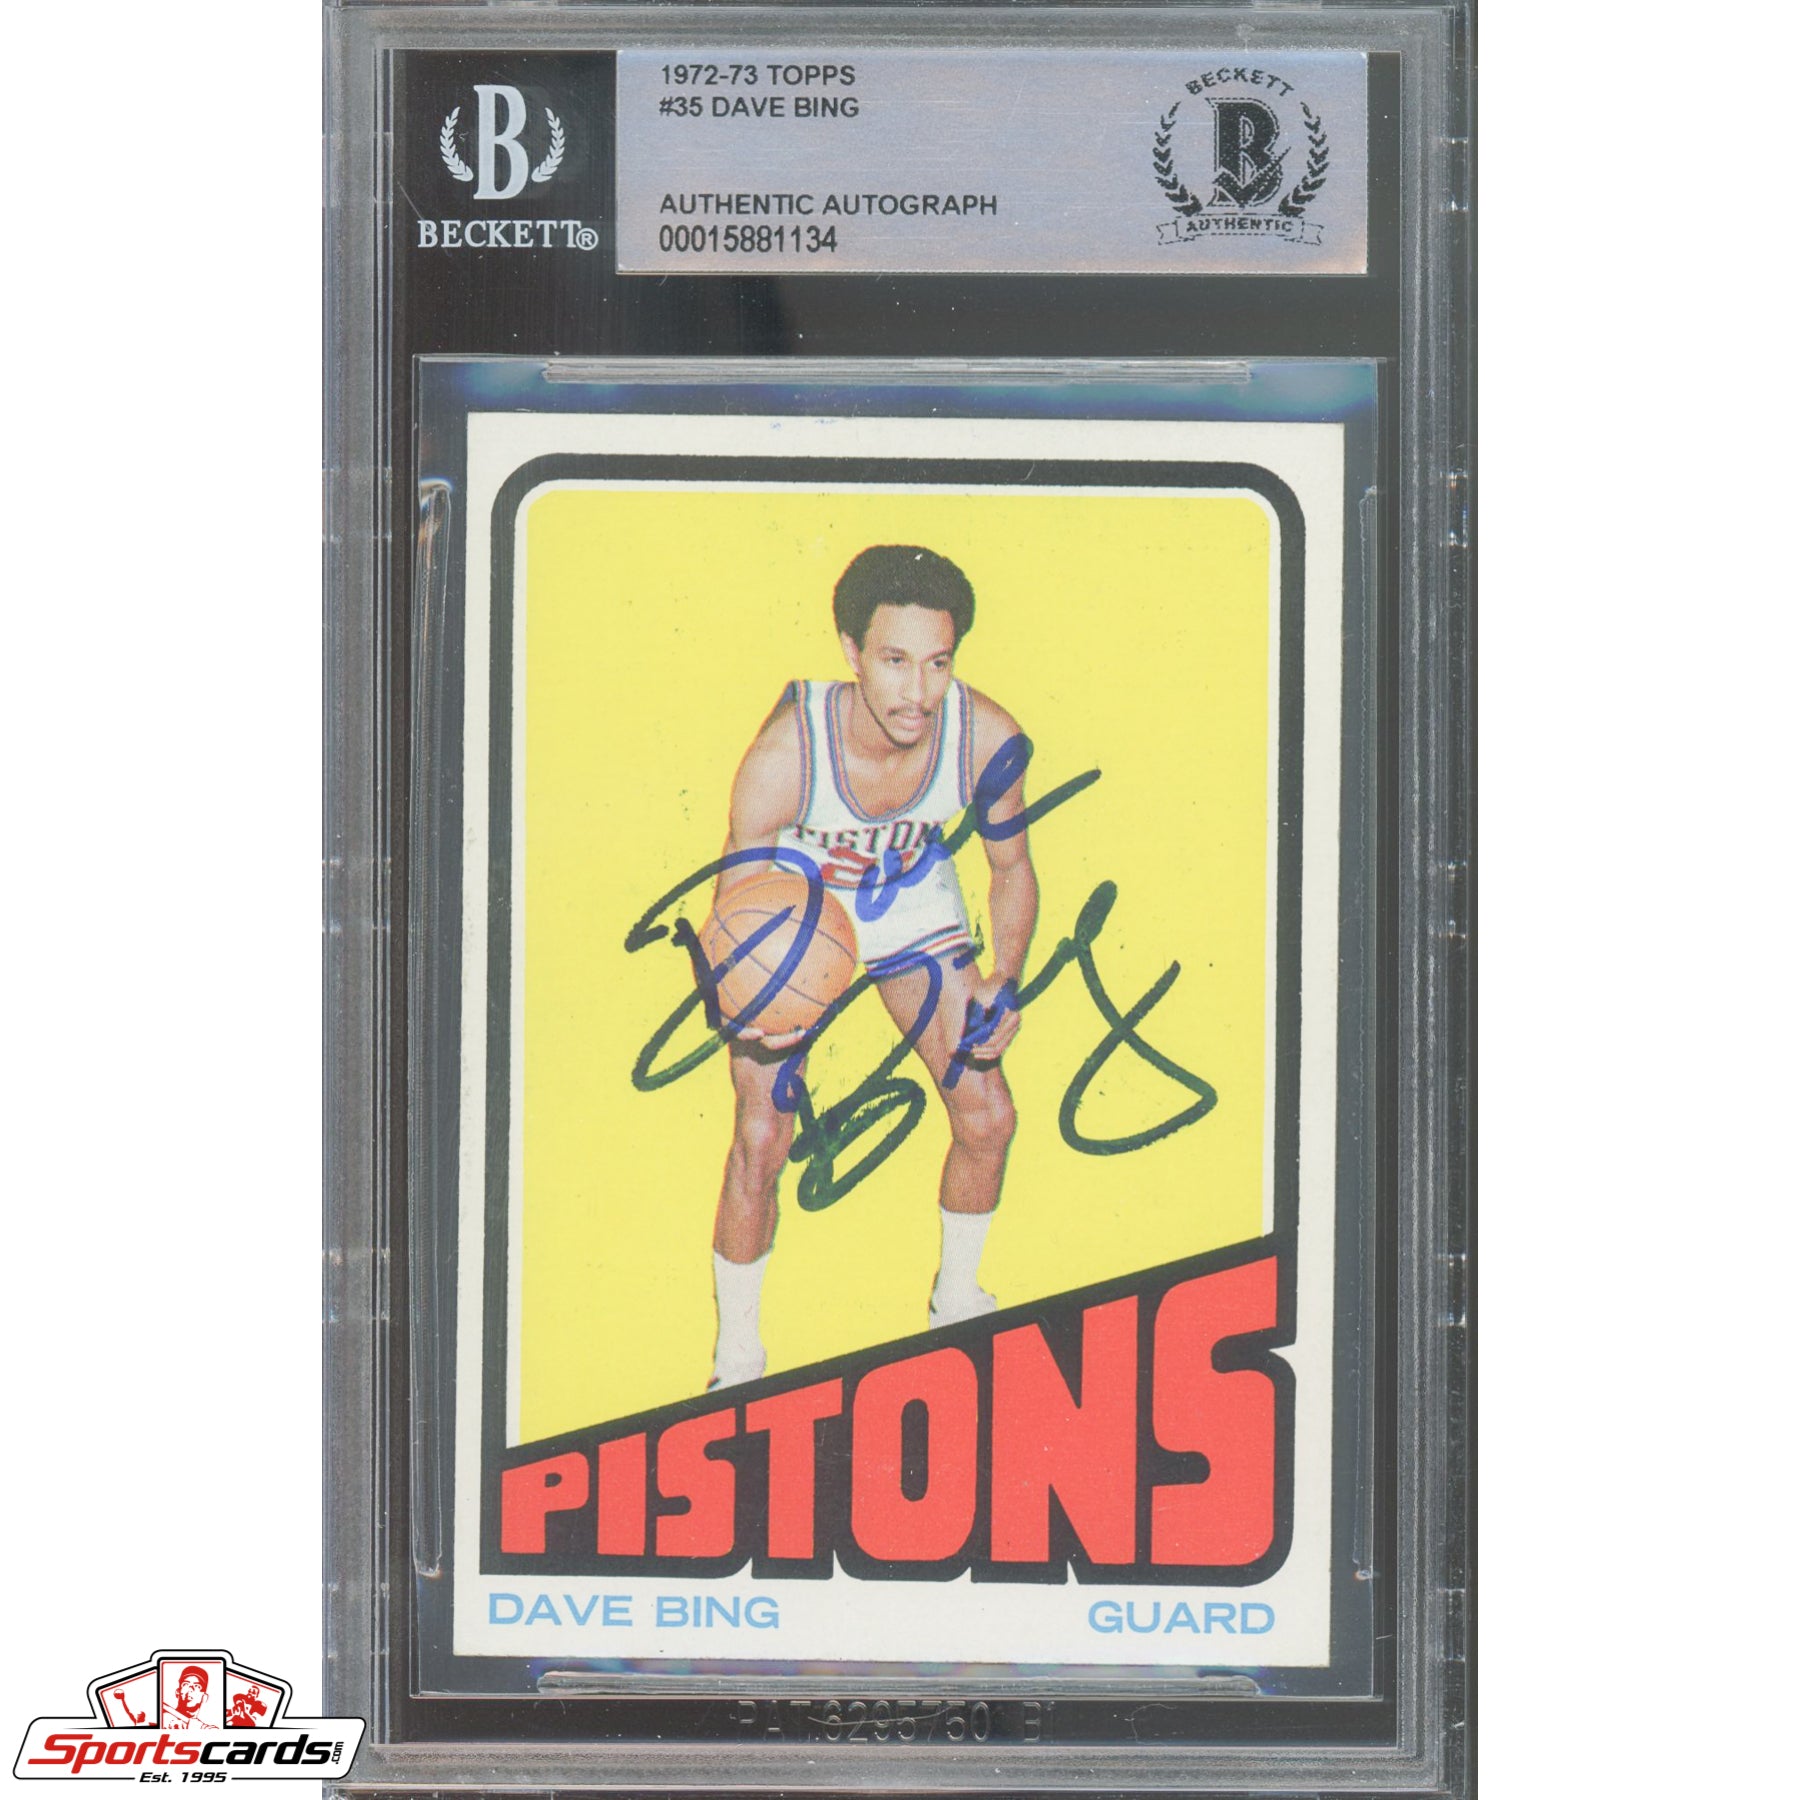 1972-73 Topps #35 Dave Bing Signed Auto Beckett BAS Pistons